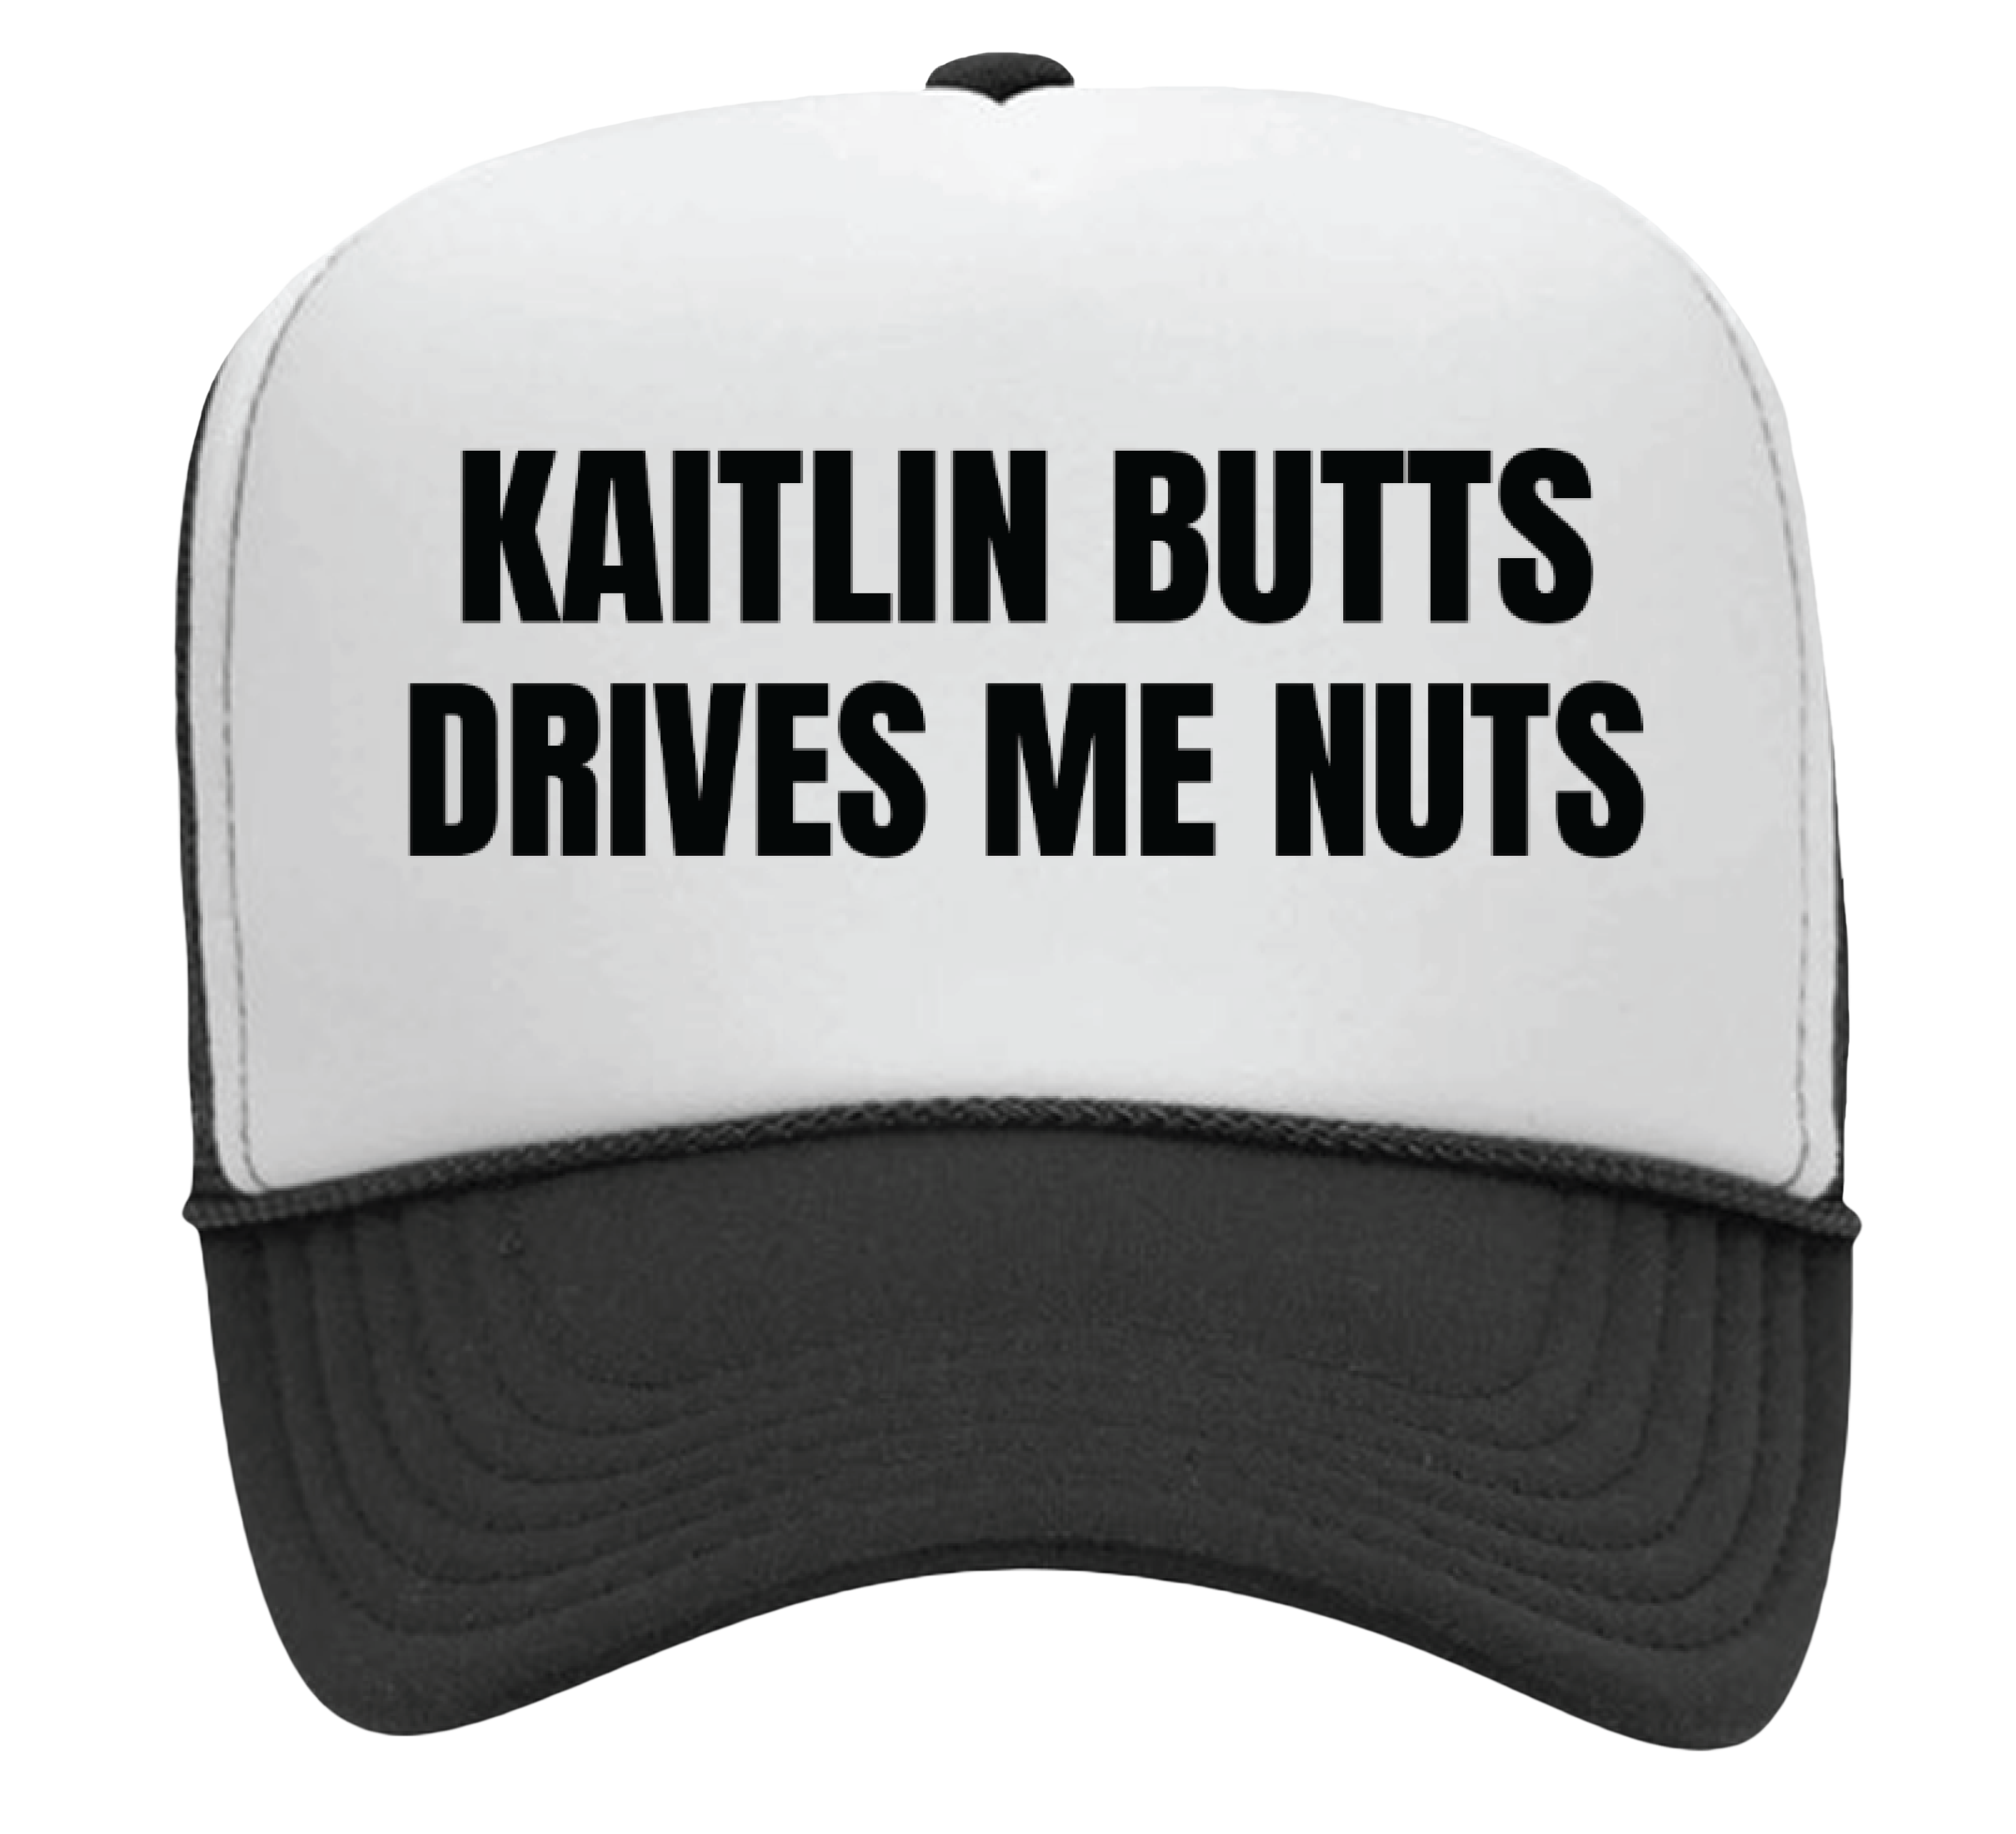 Kaitlin Butts Drives Me Nuts Trucker Hat